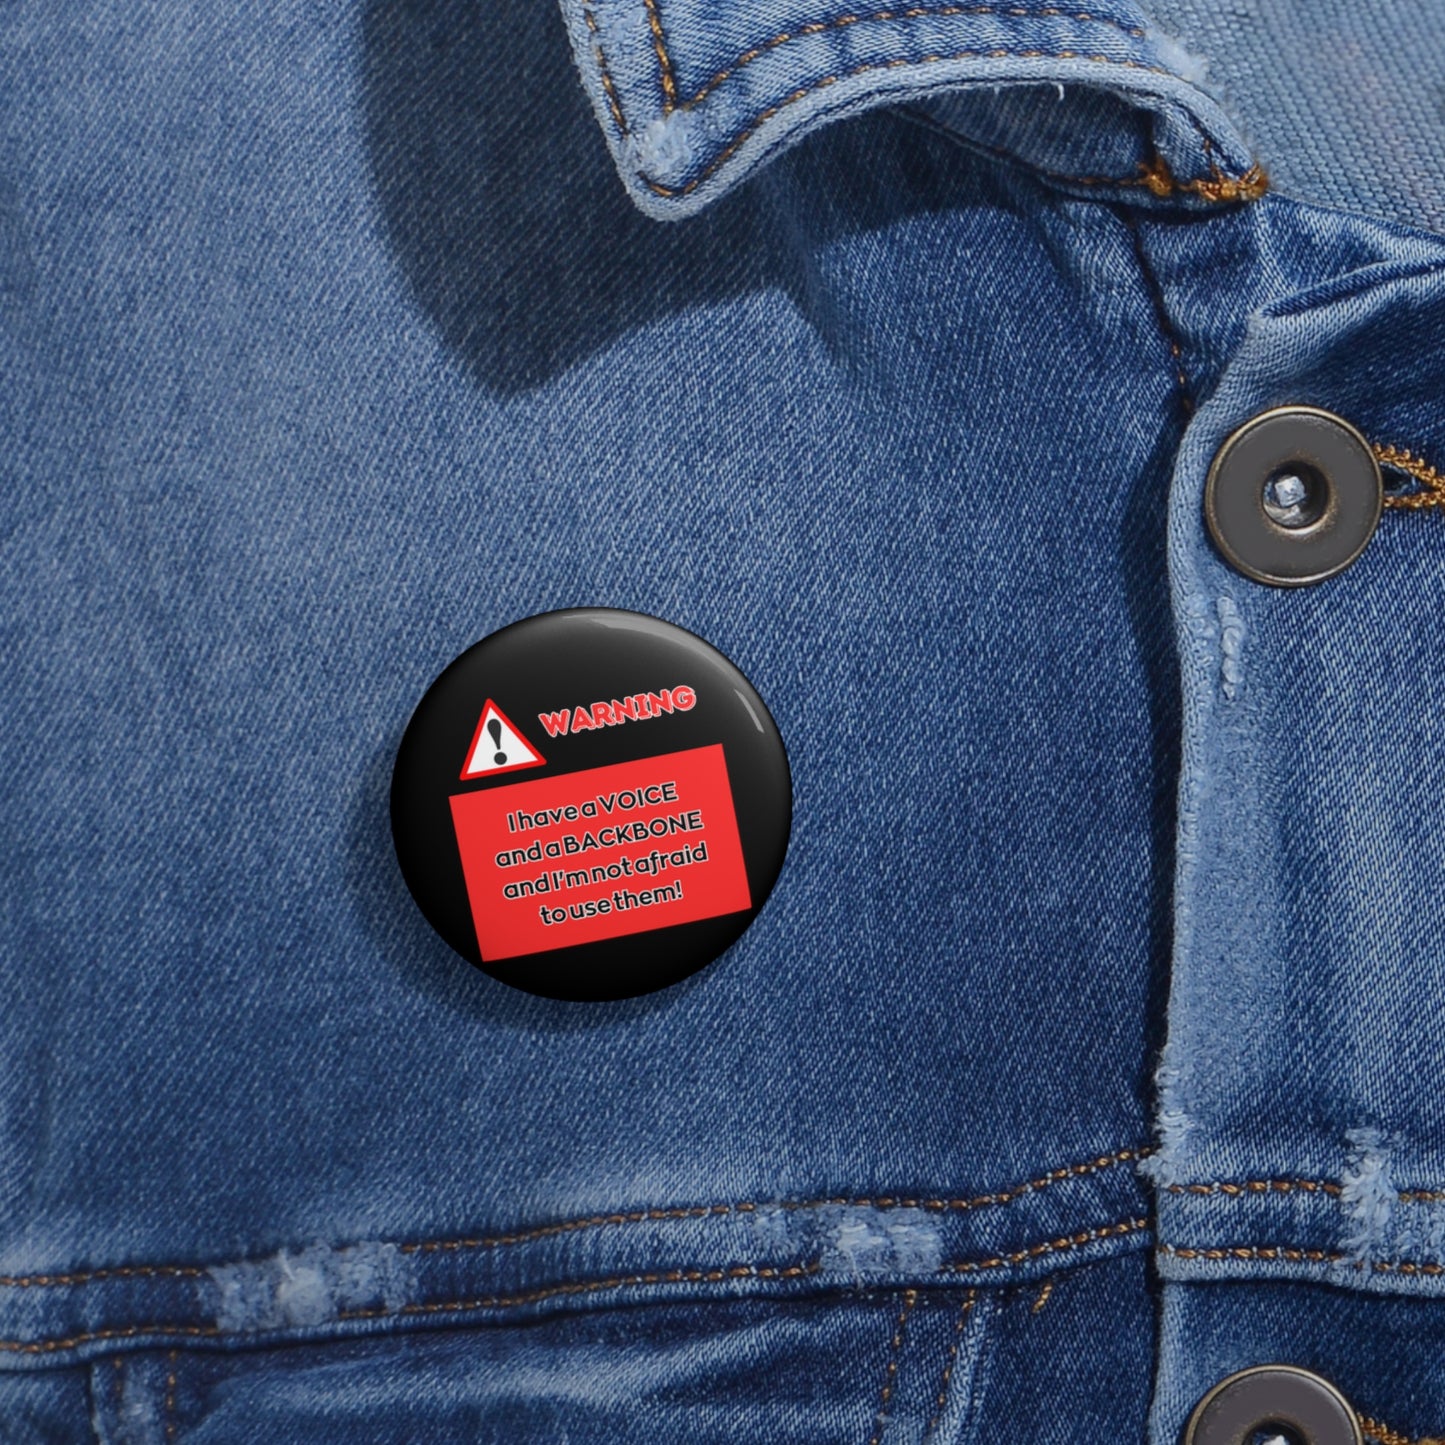 WARNING! I have a VOICE and a BACKBONE and I'm not afraid to use them! - small pin button